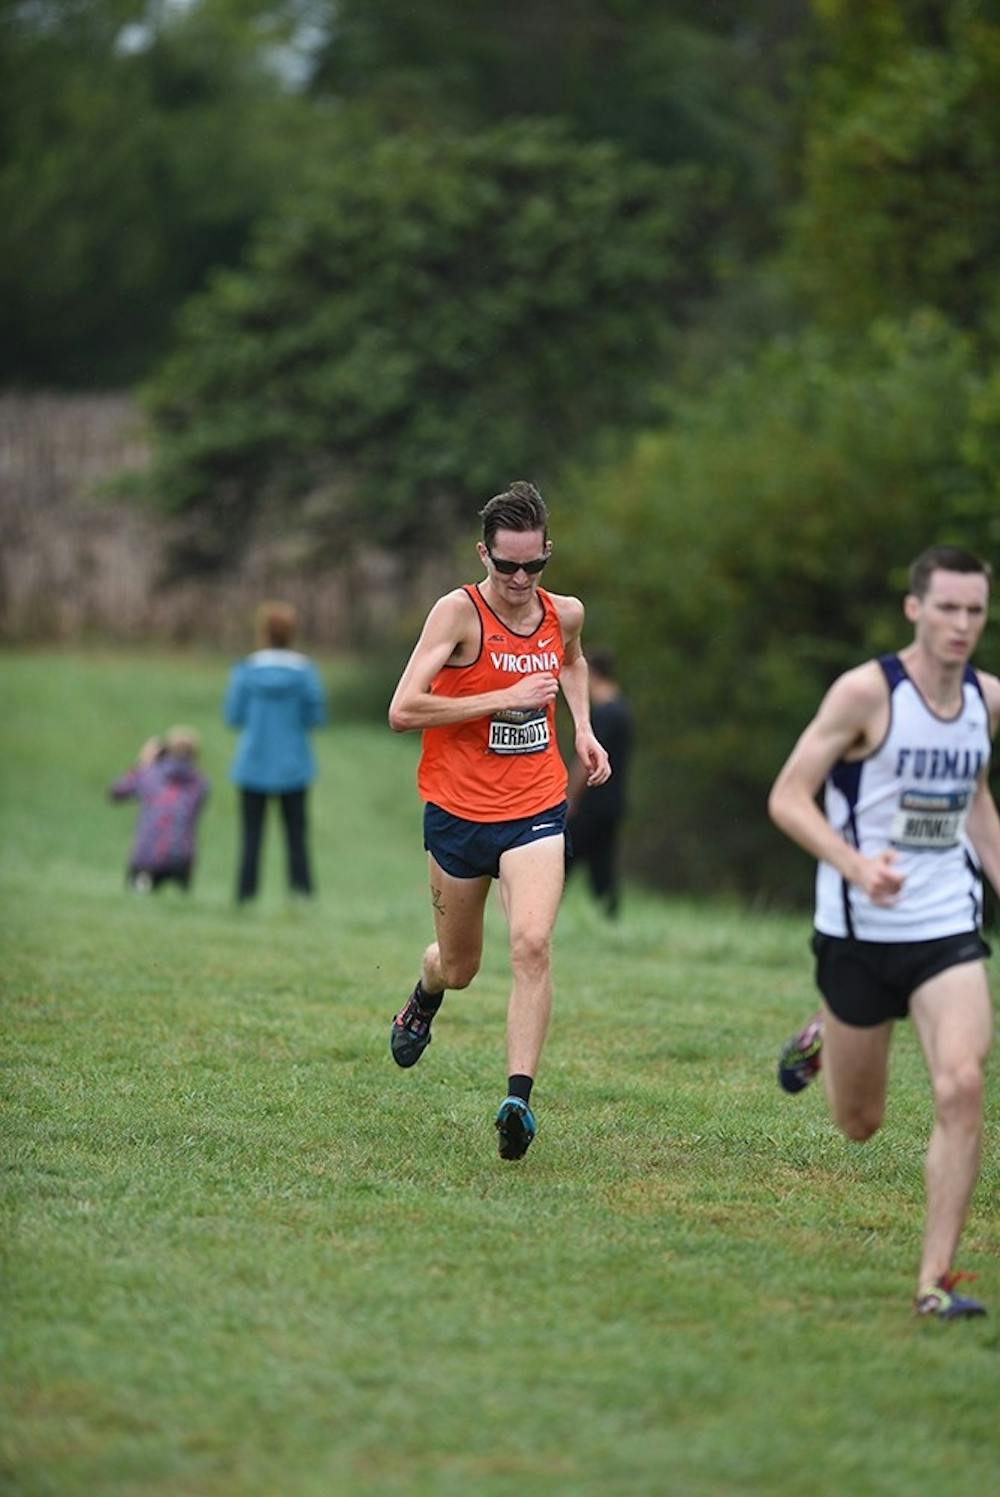 <p>With a ninth place finish overall&nbsp;in the Men's 10k race at the NCAA Southeast Regional, senior Zach Herriott helped his team earn an automatic bid to the NCAA Championships. Virginia cross country finished second with a total score of 105.</p>